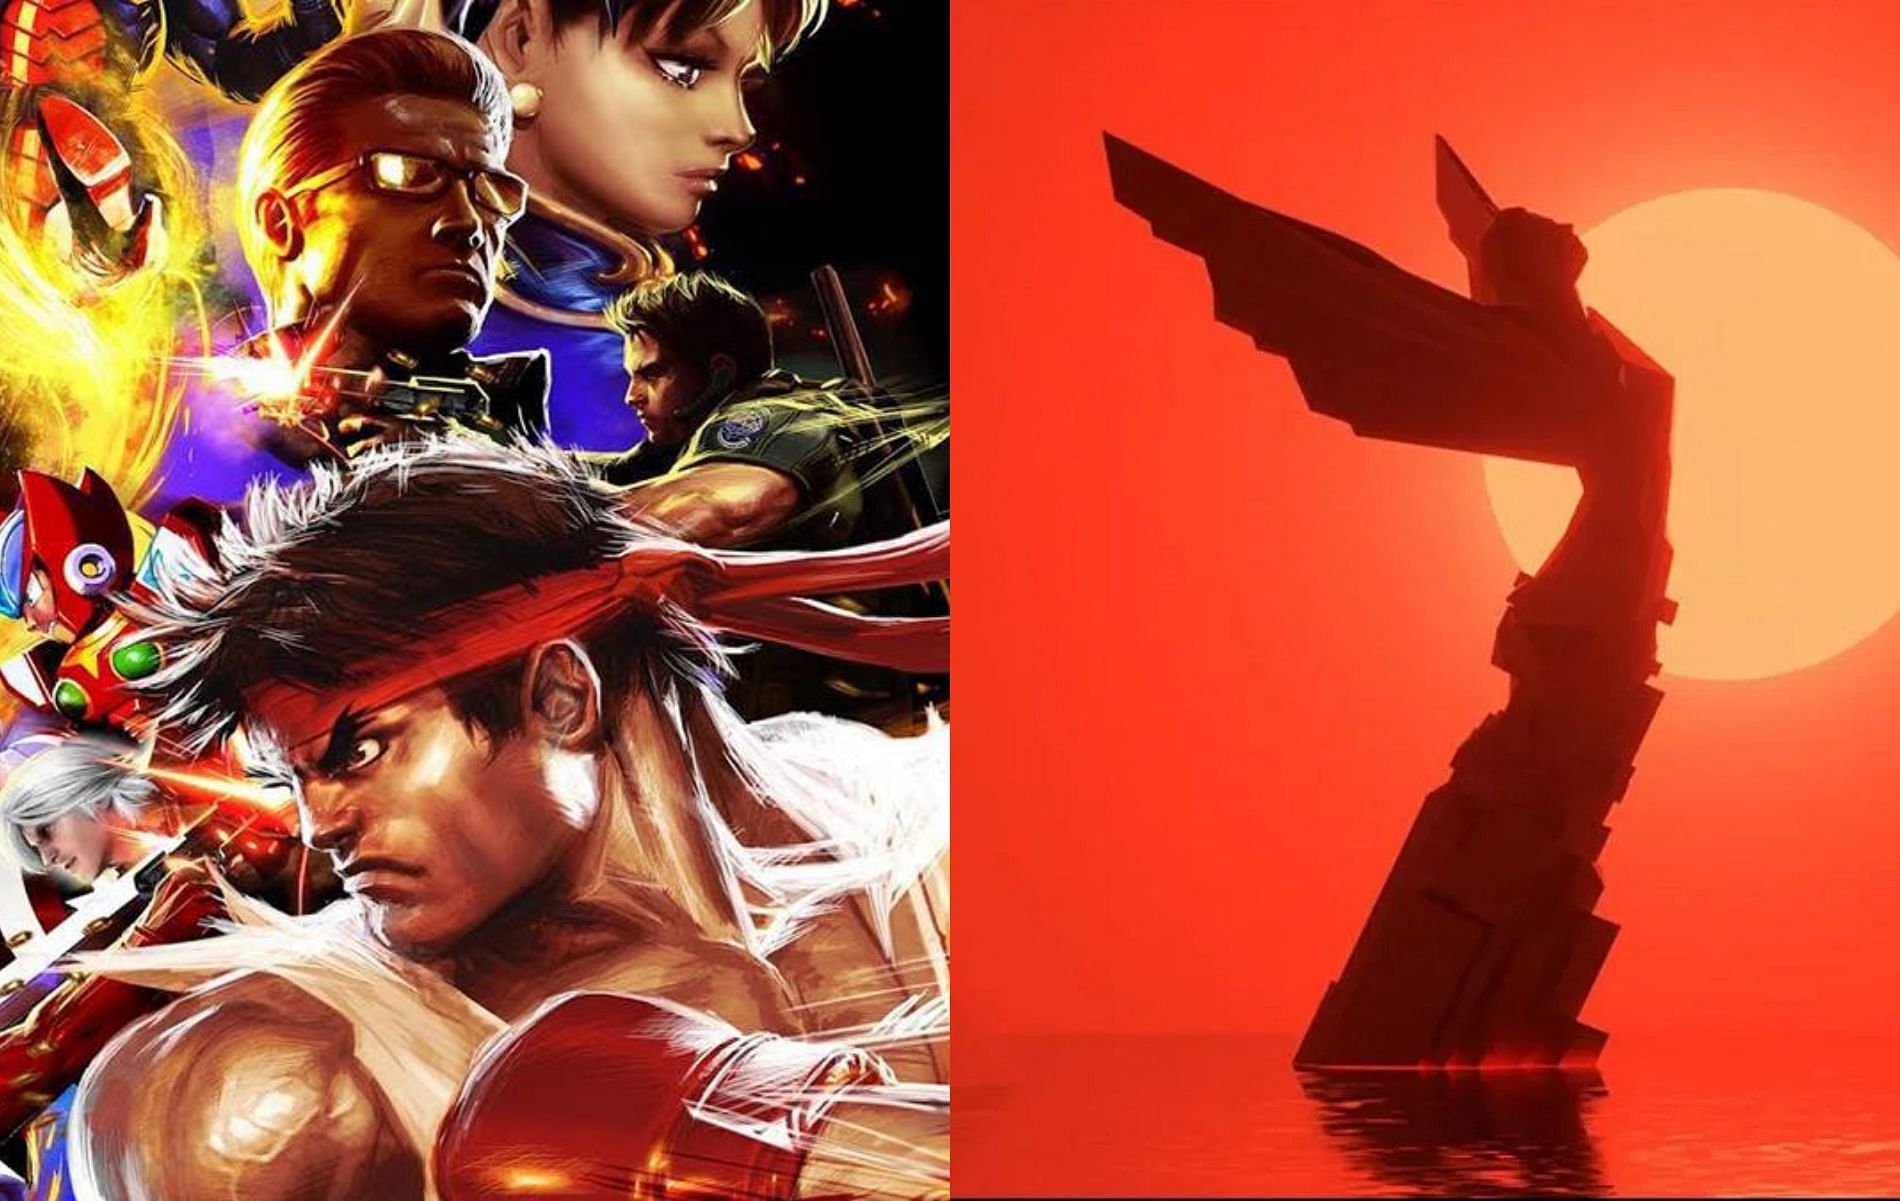 The major Japanese games publisher is set to make some announcements at the upcoming game awards showcase (Images via Capcom/The Game Awards)